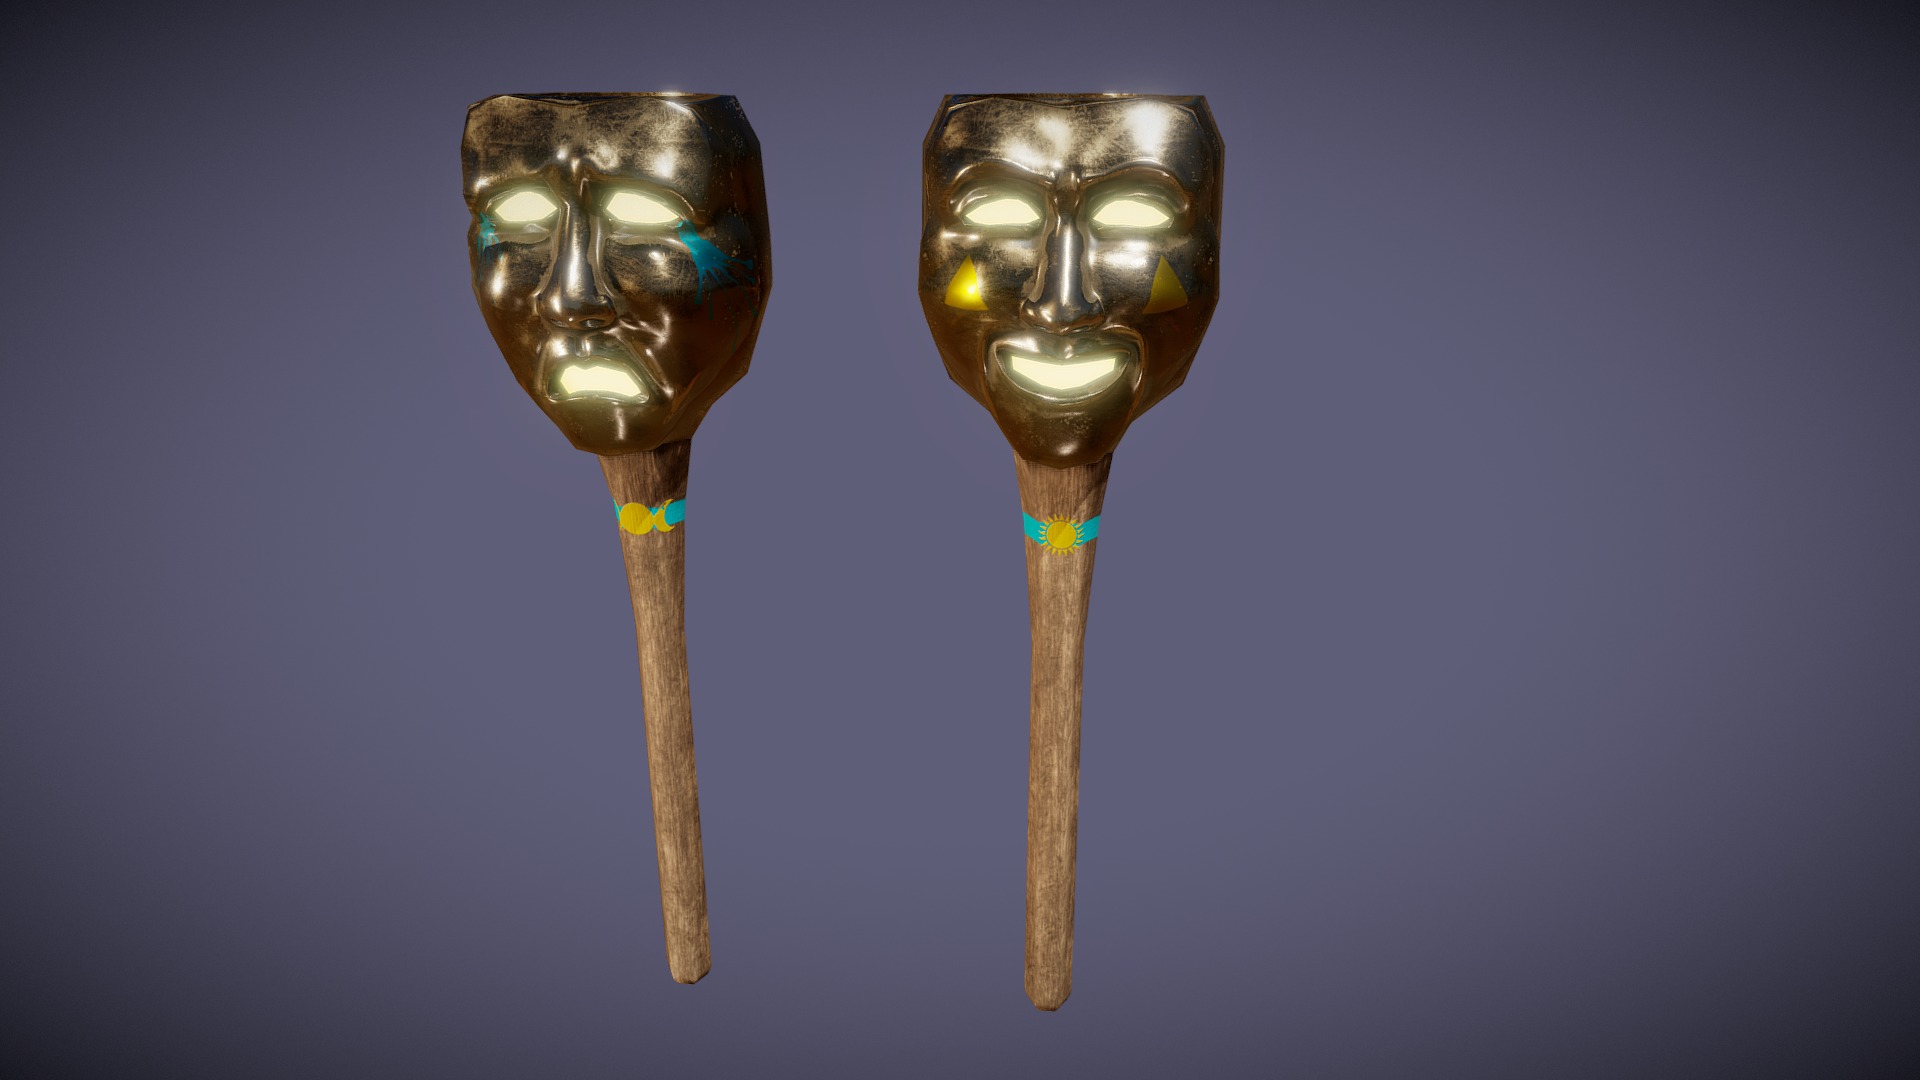 3D model Twin Torches of Hecate - This is a 3D model of the Twin Torches of Hecate. The 3D model is about a pair of toothbrushes.